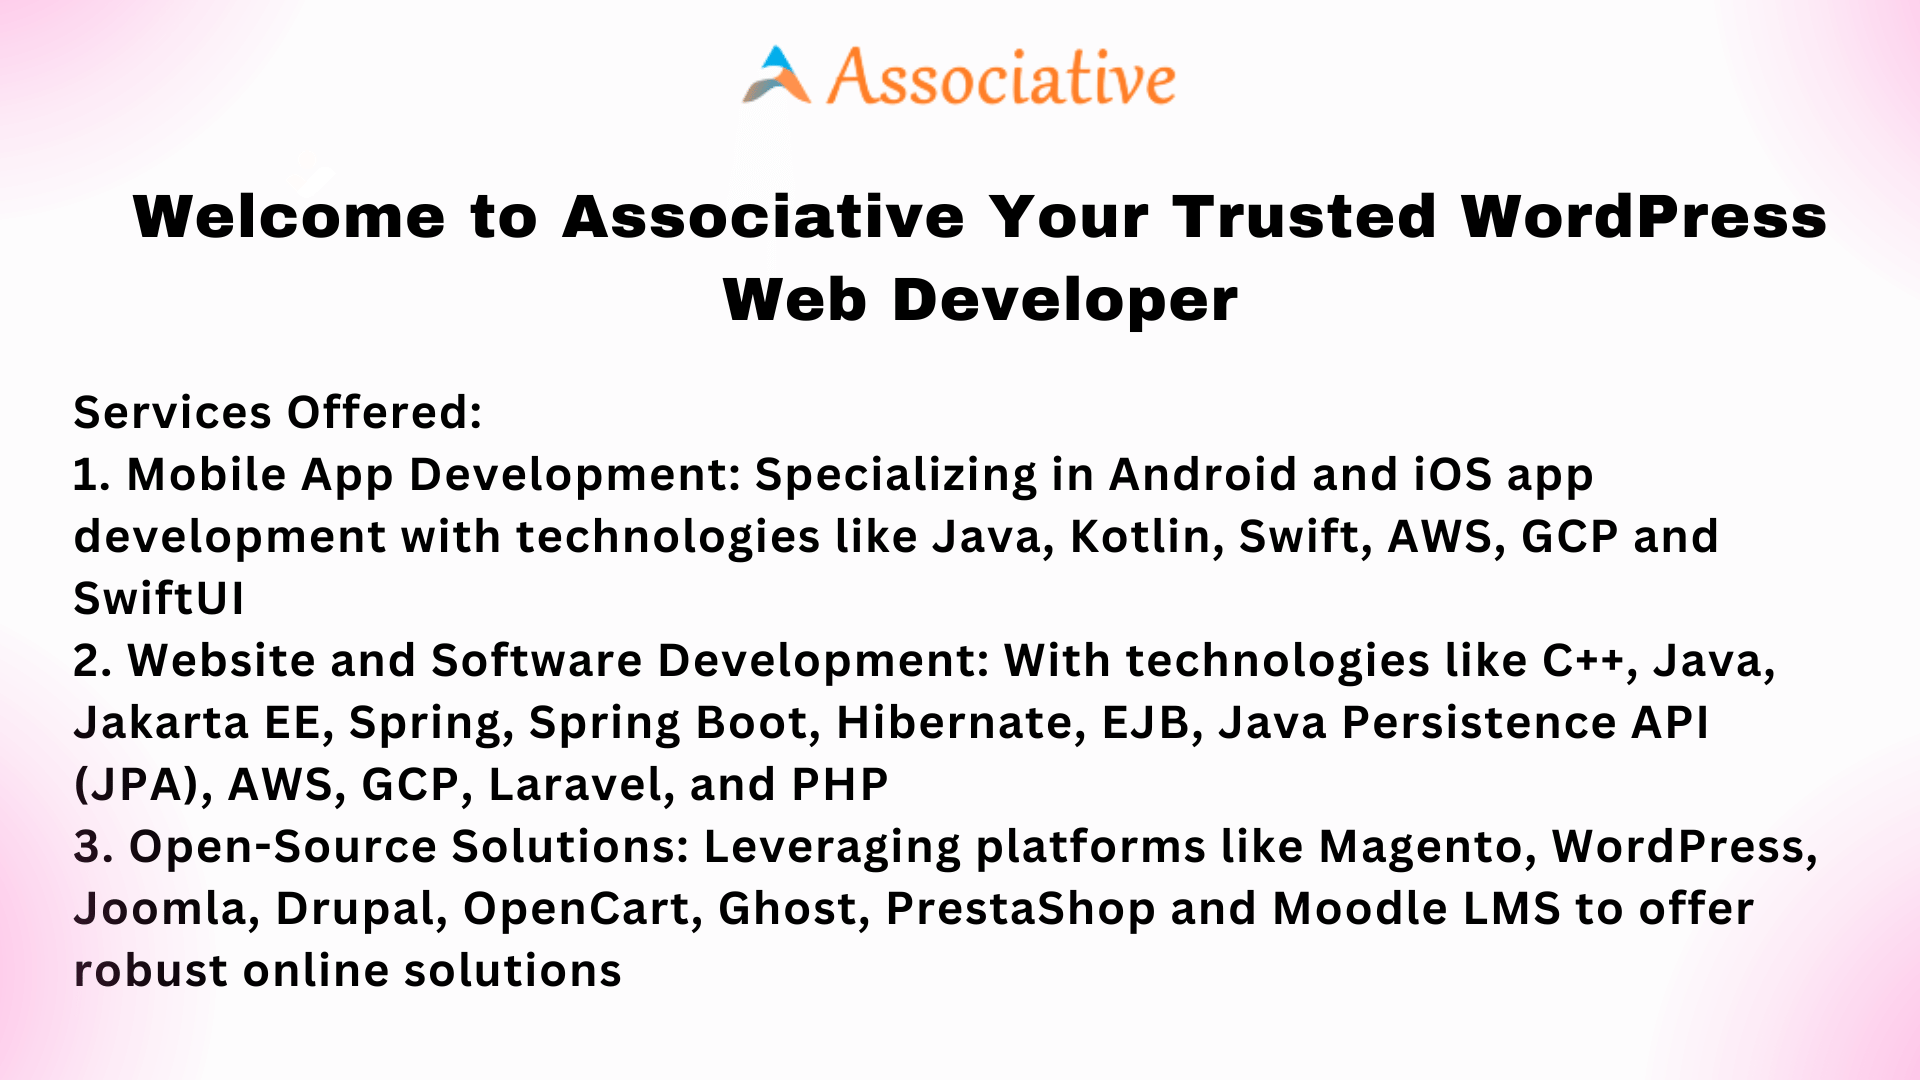 Welcome to Associative Your Trusted WordPress Web Developer